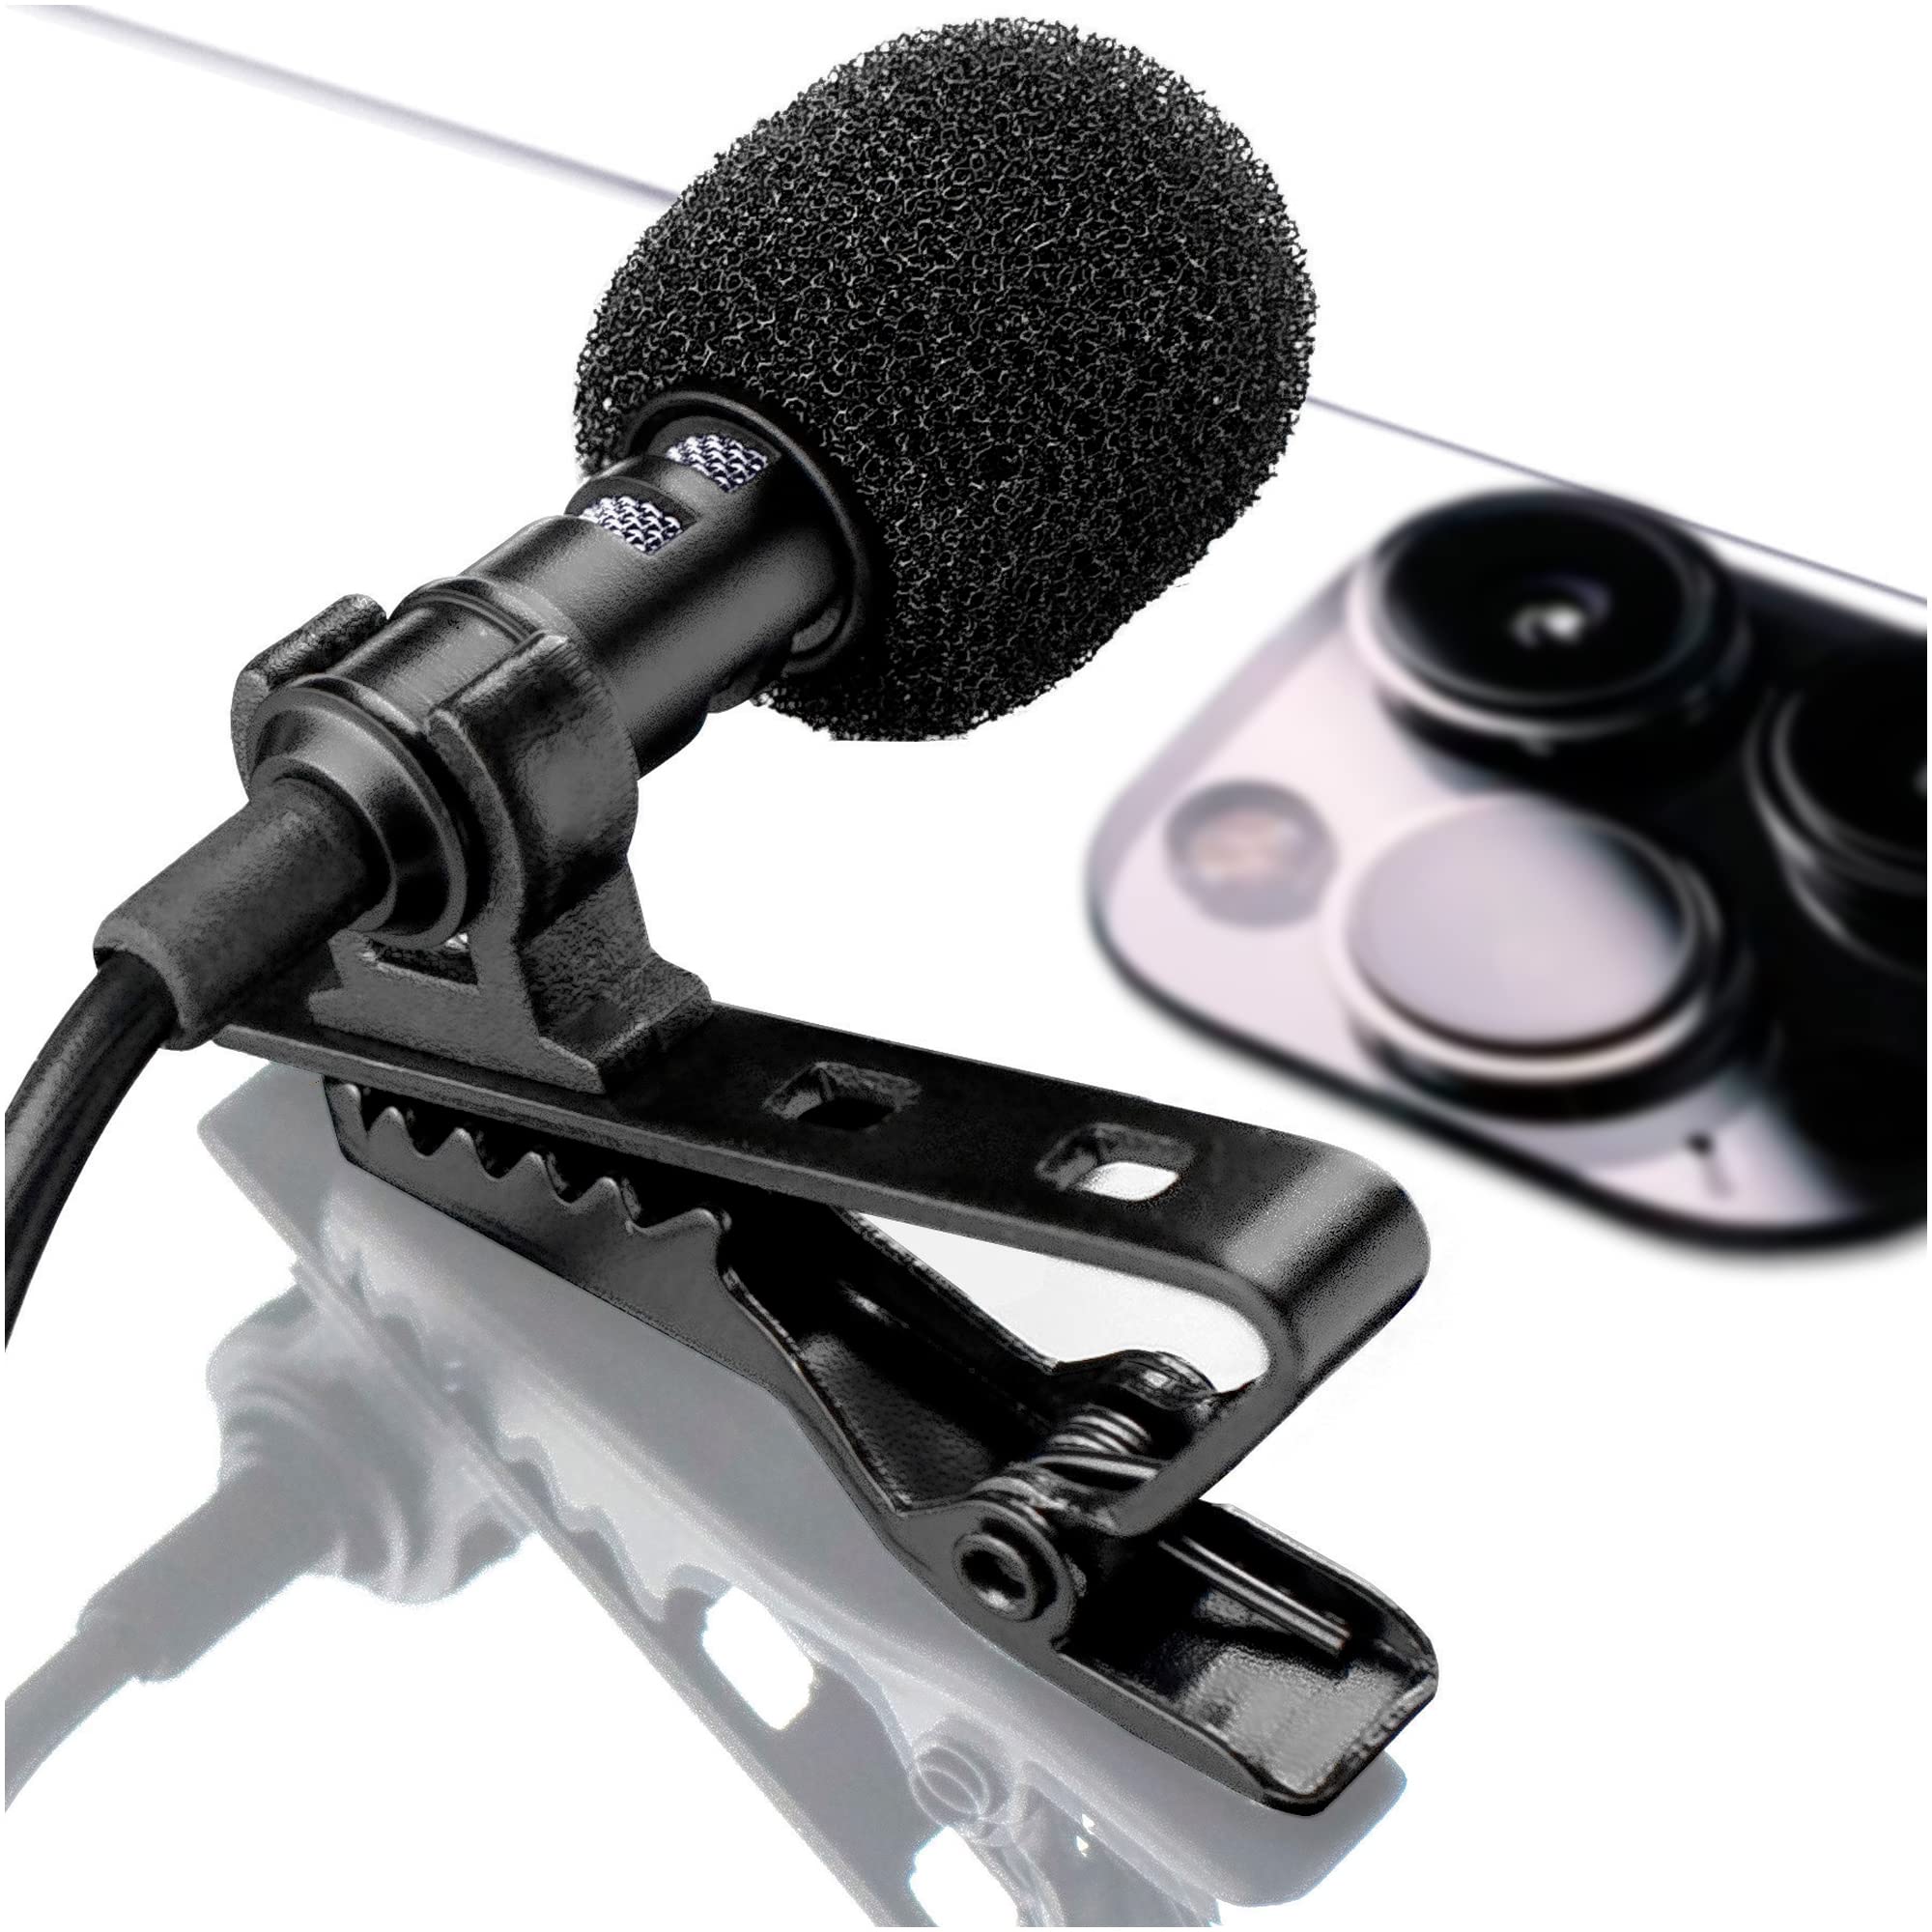 Microphone with extreme static noise